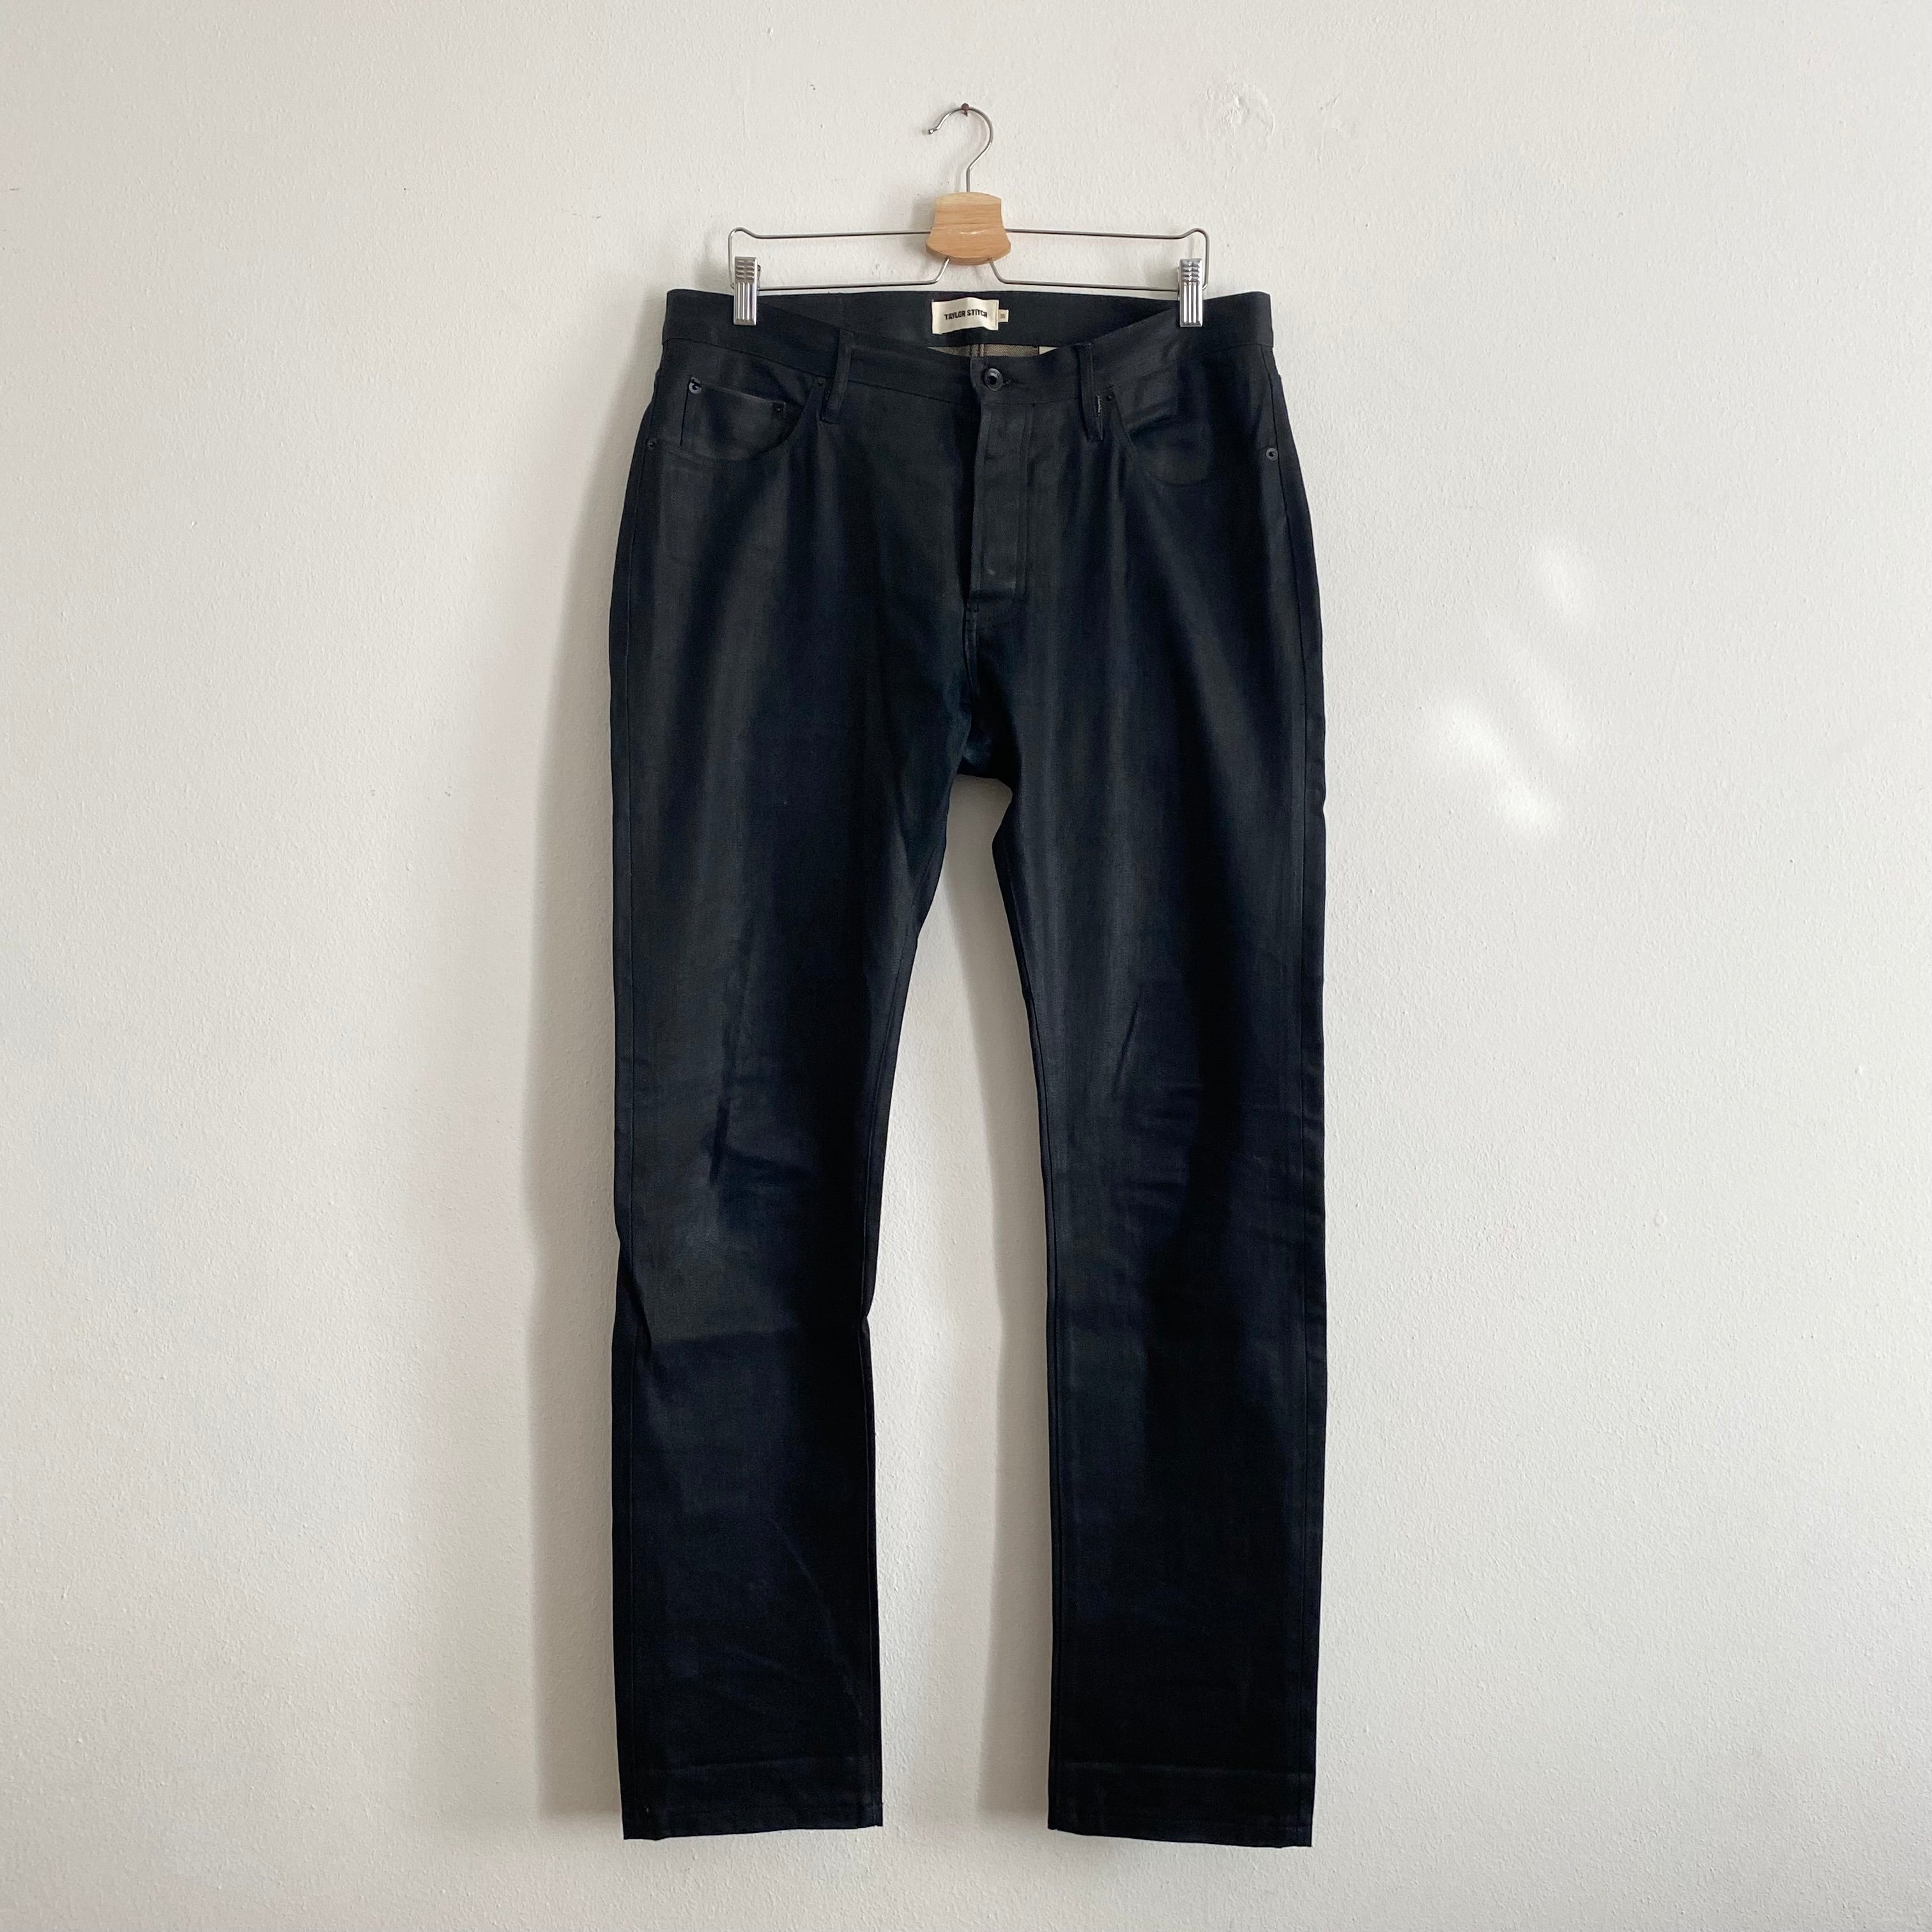 The Slim Jean in Black Over-Dye Selvage - 35